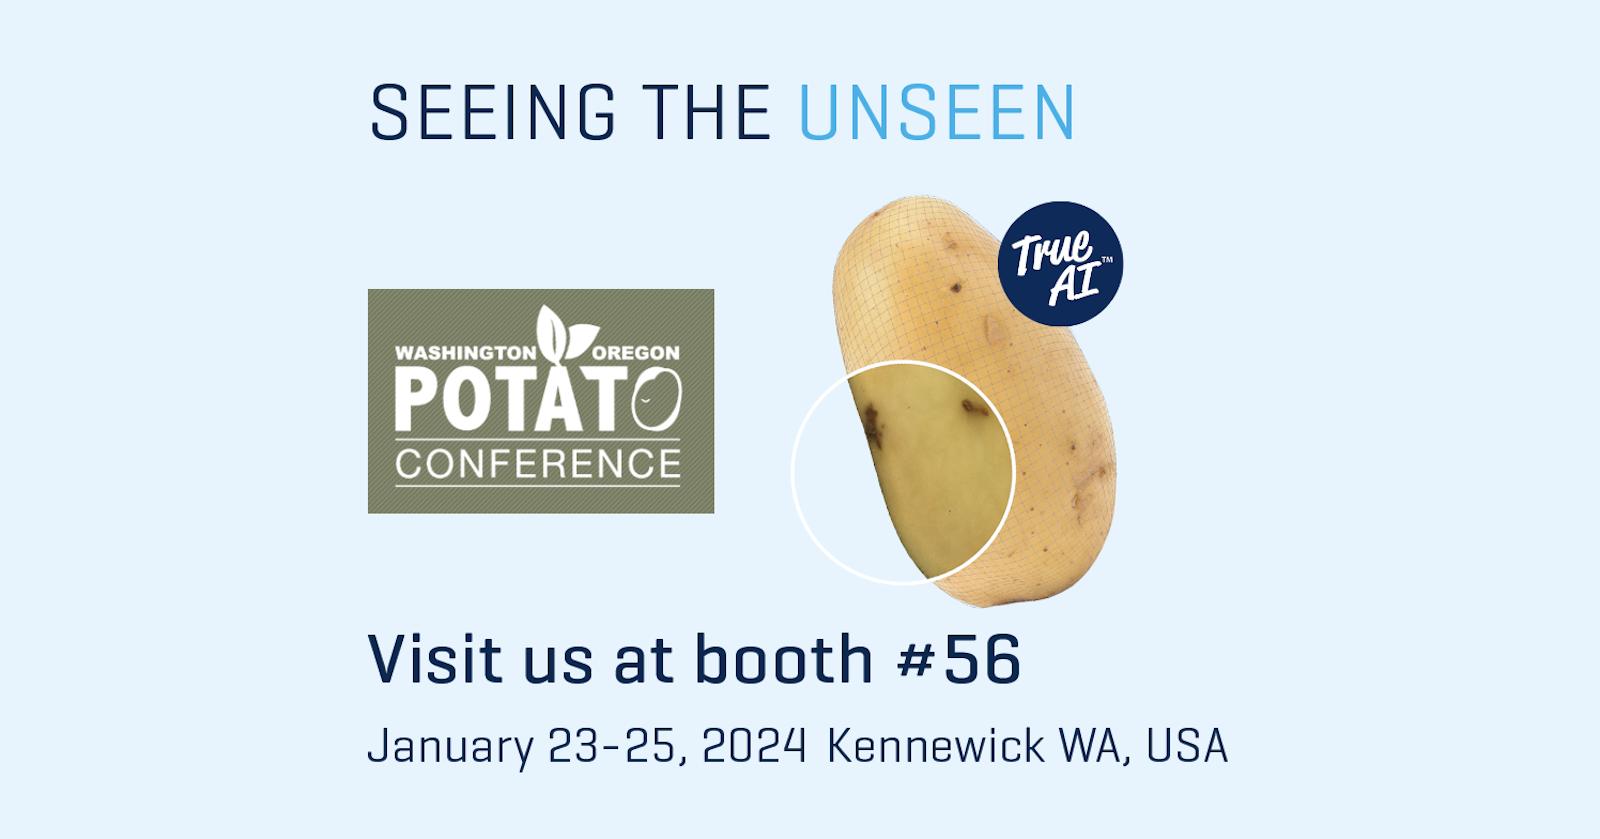 Discover powerful defect detection with AI at Washington-Oregon Potato Conference